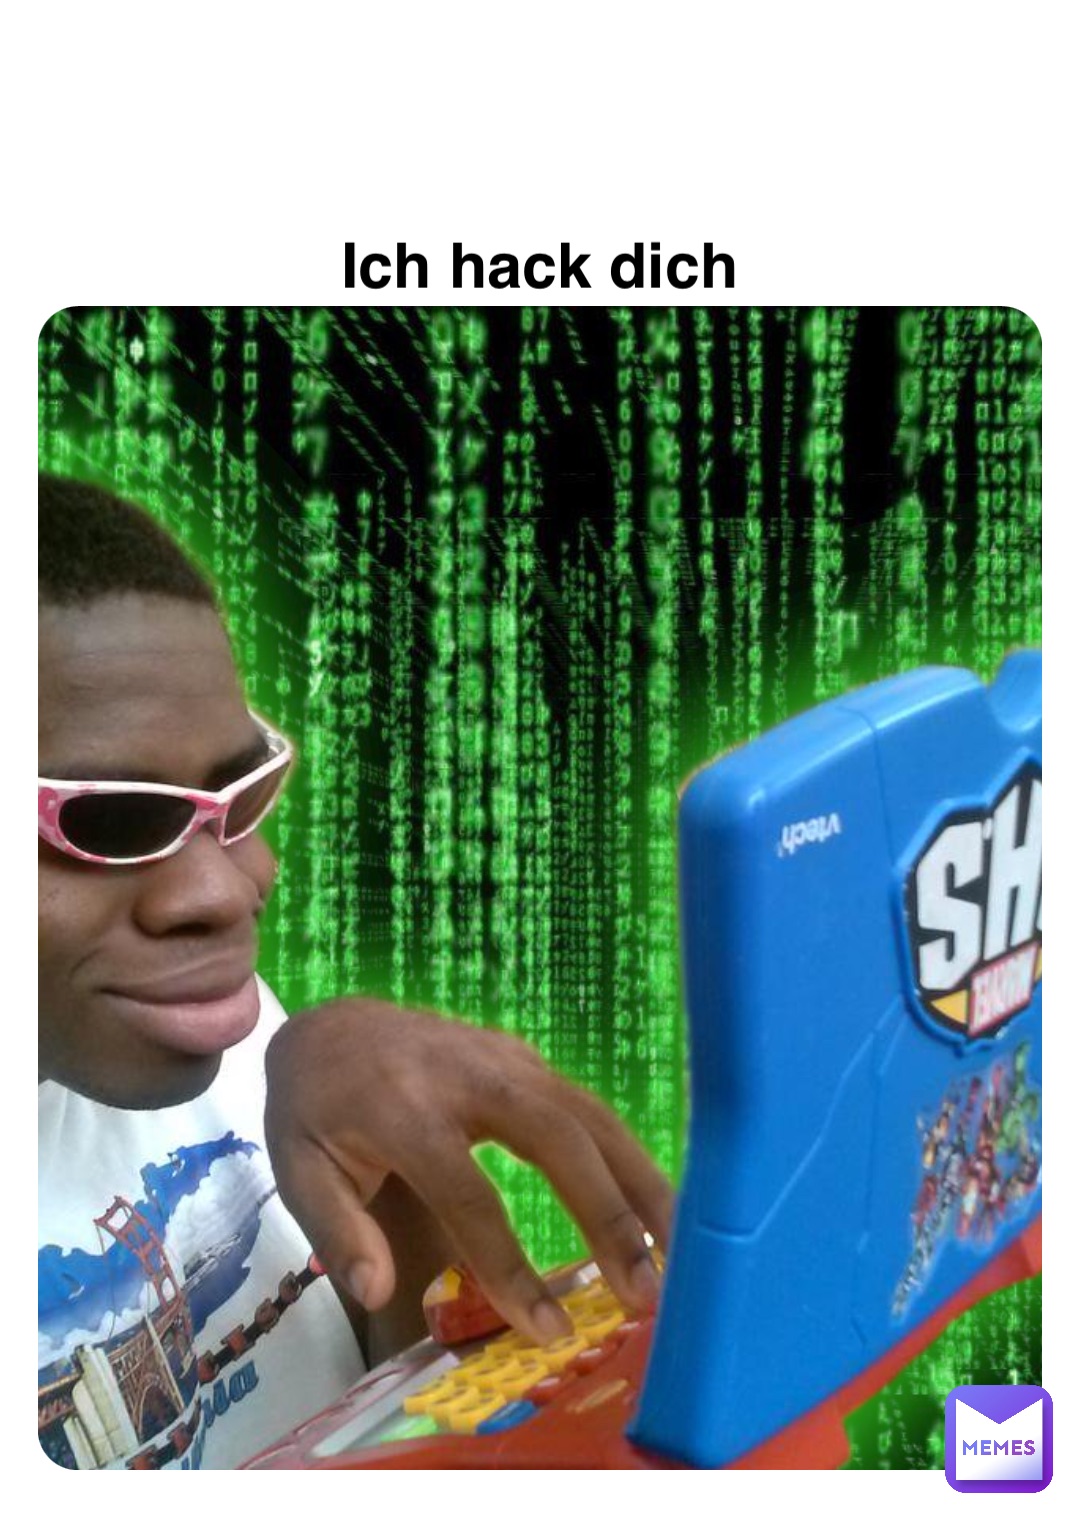 Double tap to edit Ich hack dich